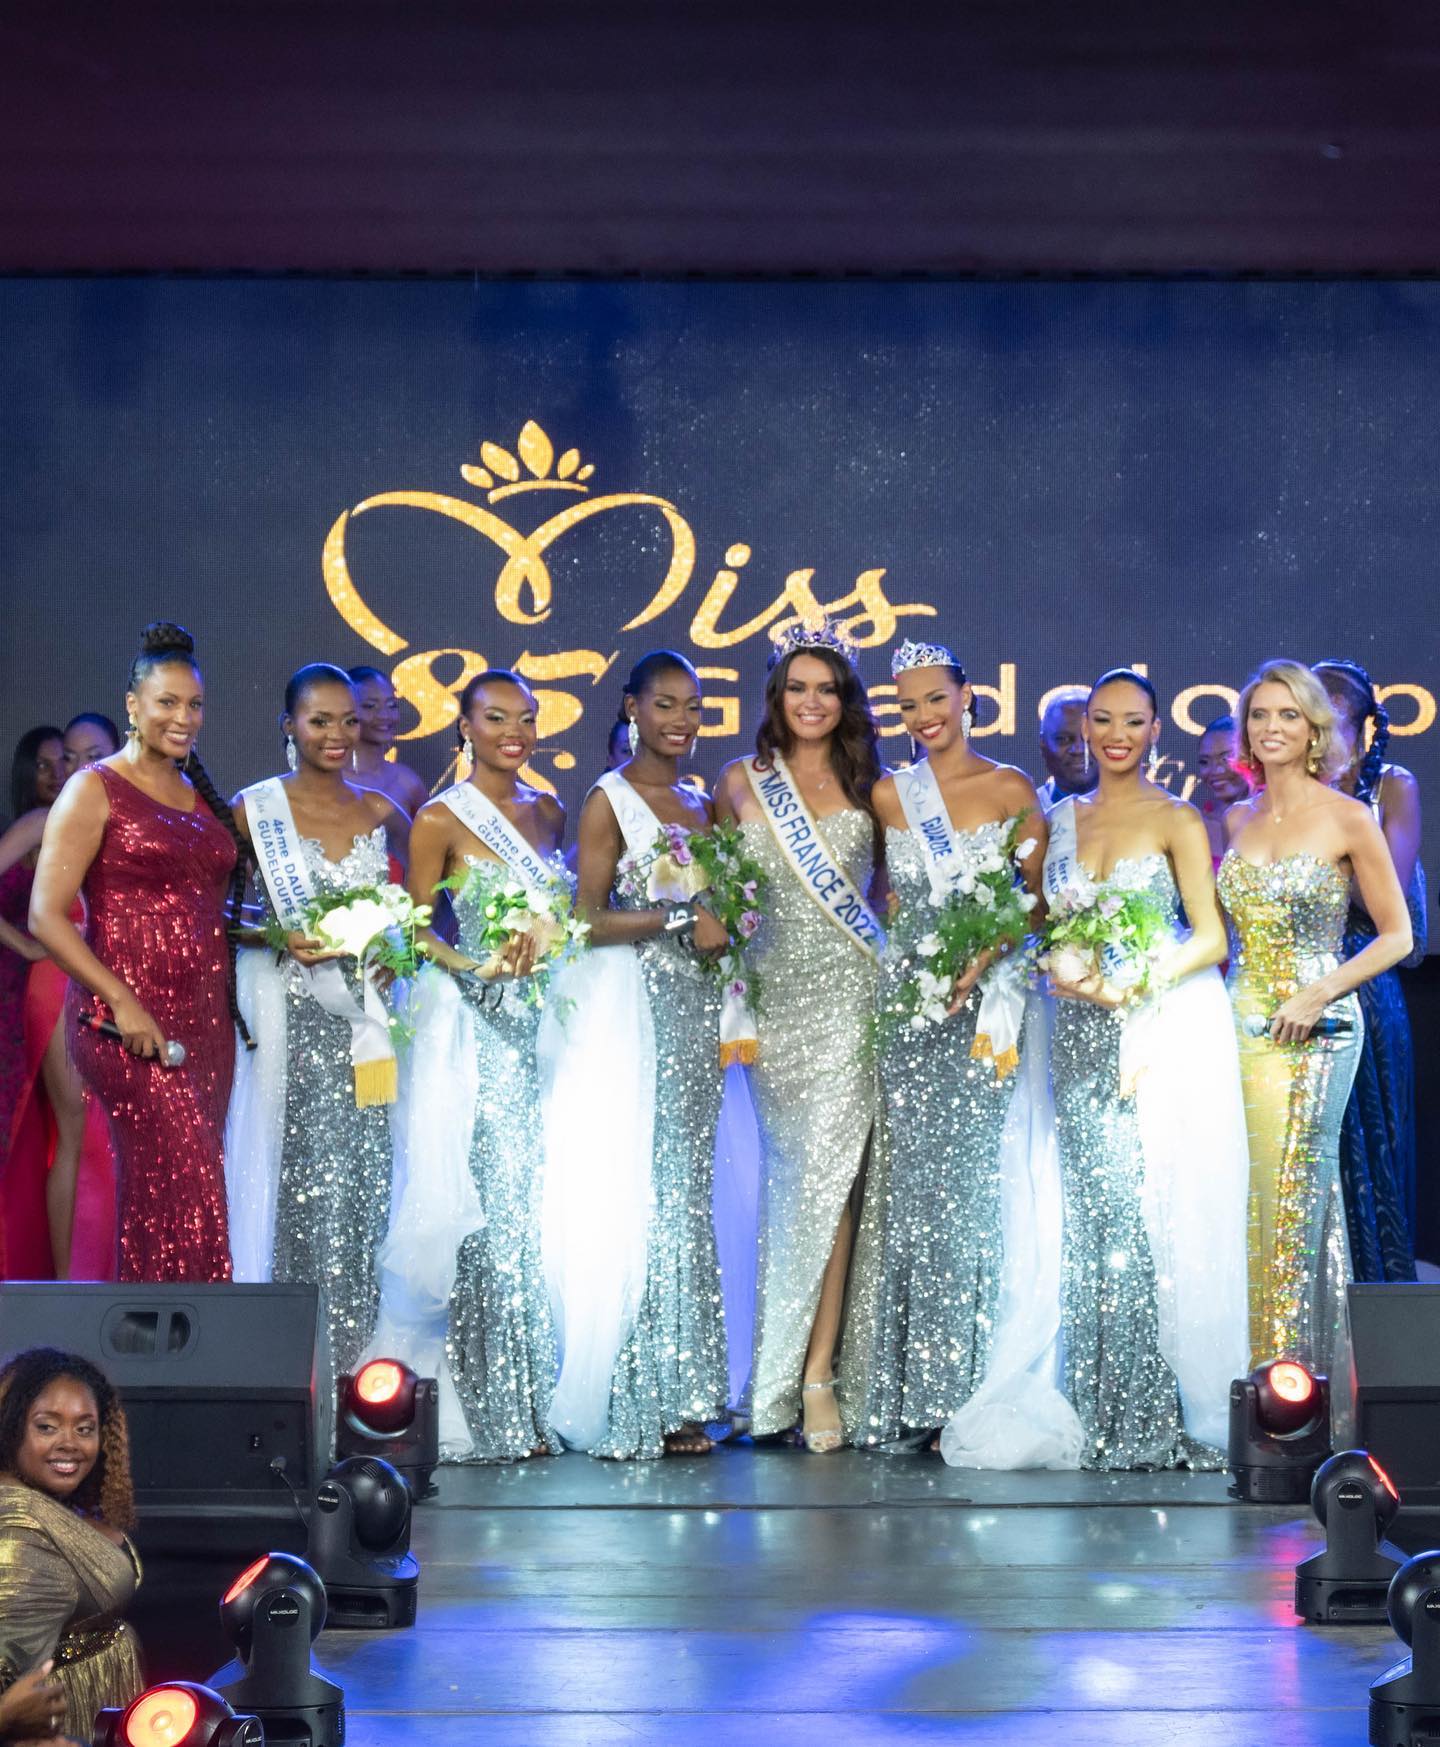 Indira Ampiot crowned Miss Guadeloupe 2022